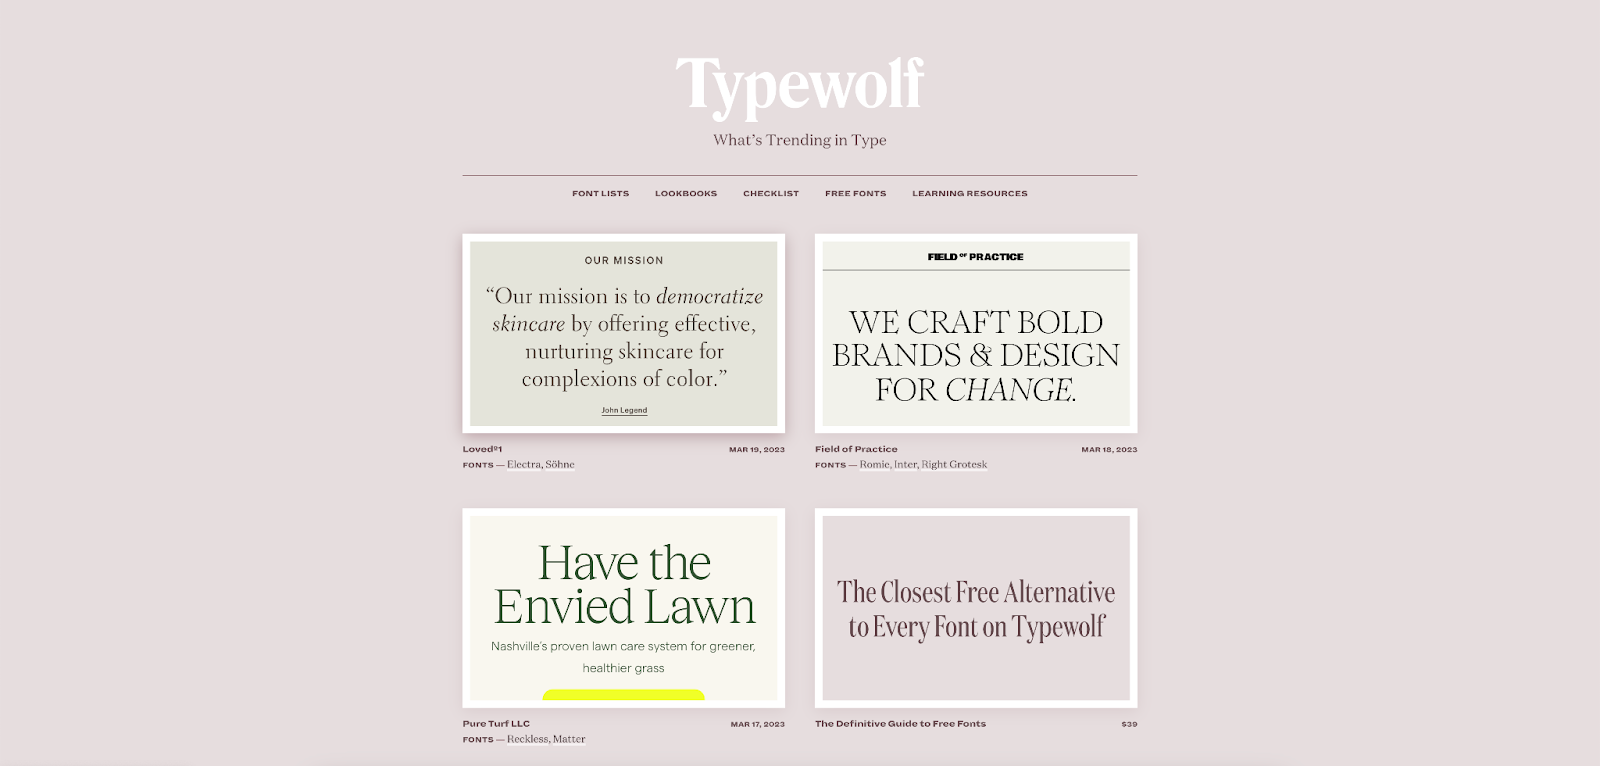 The Typewolf website features bold typography, a muted color palette for your retro website design inspiration